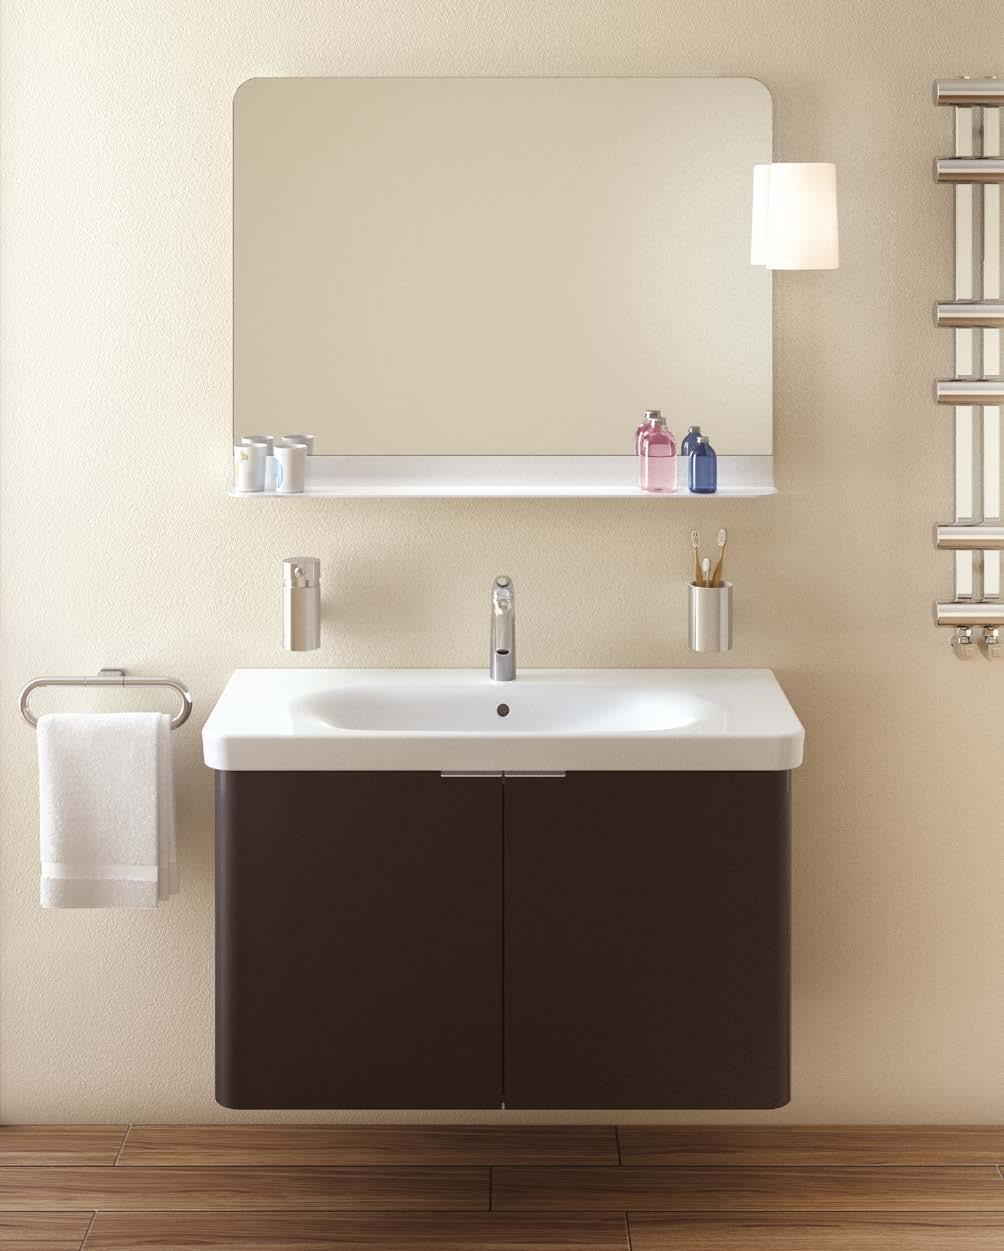 NEST THE NEST MIRROR, WITH INTEGRATED SHELF AND OPTIONAL LAMP, IS AVAILABLE IN WIDTHS OF 60, 80 OR 100CM NEST NEST 5682 Washbasin, 80cm 206 56536 Washbasin unit with doors,